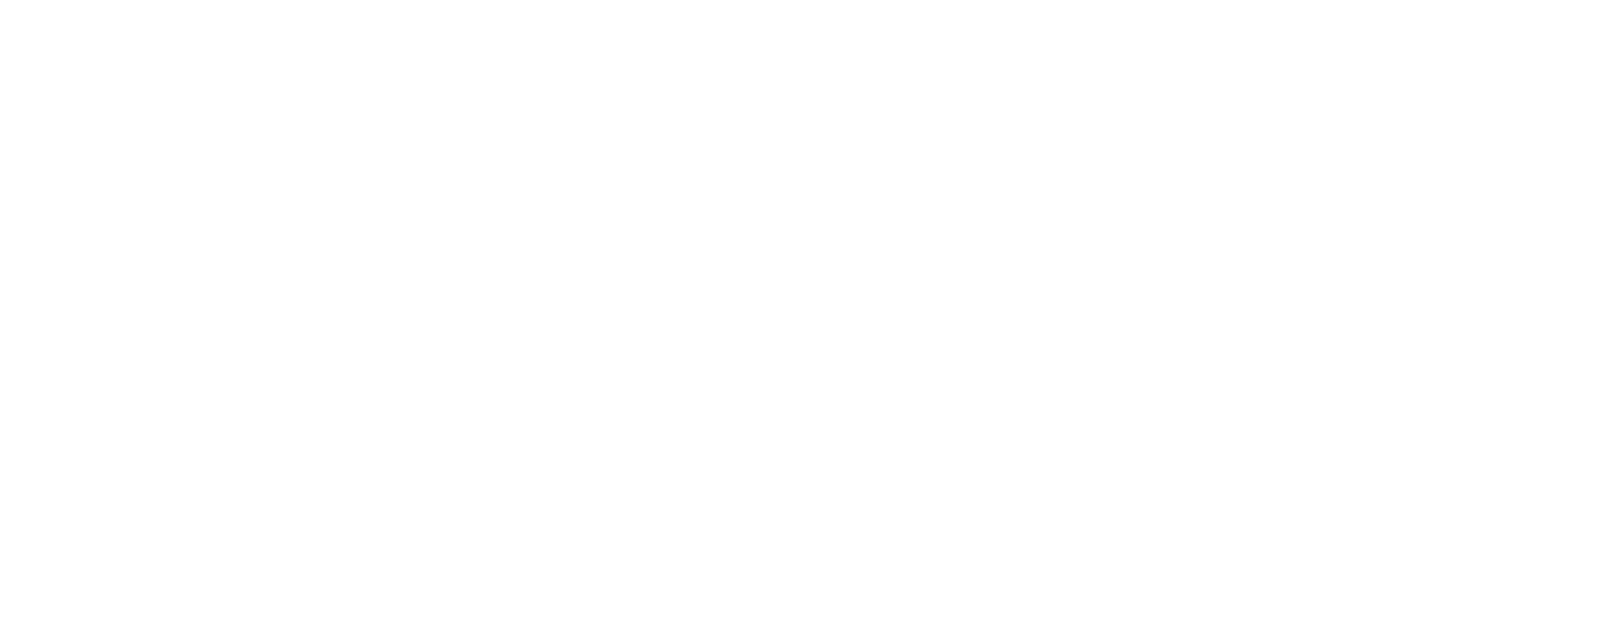 A Professional Roofing Company